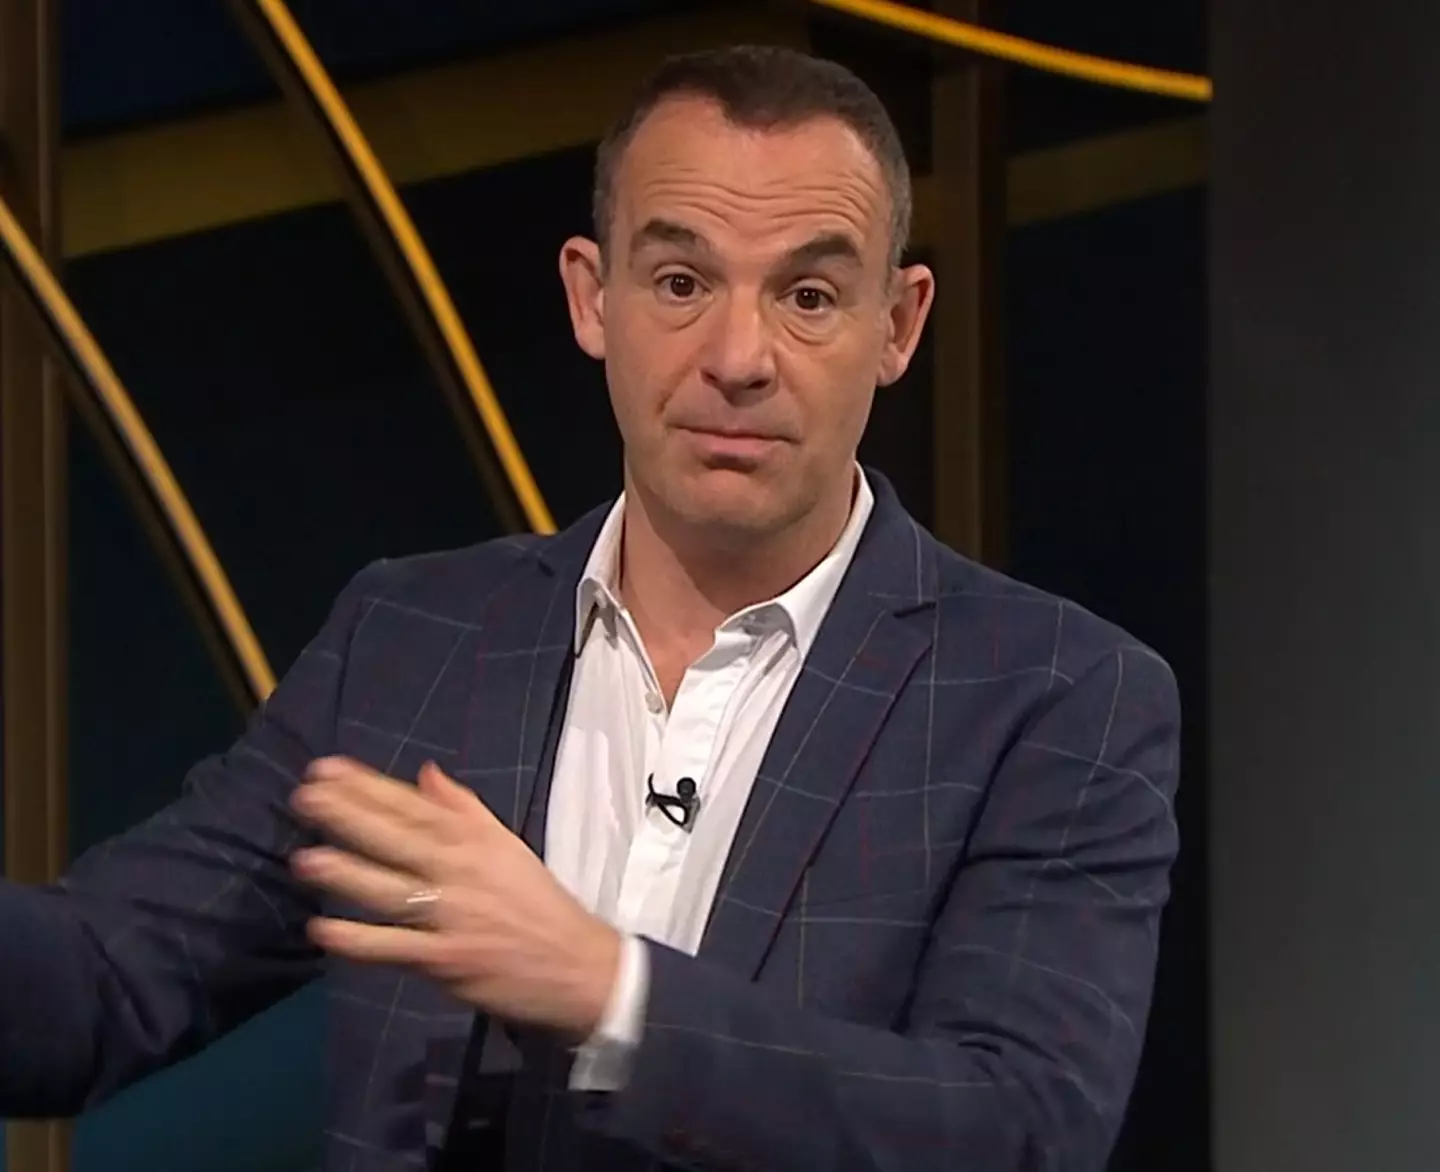 Martin Lewis received a message from a fan who said his advice had helped them buy a house.